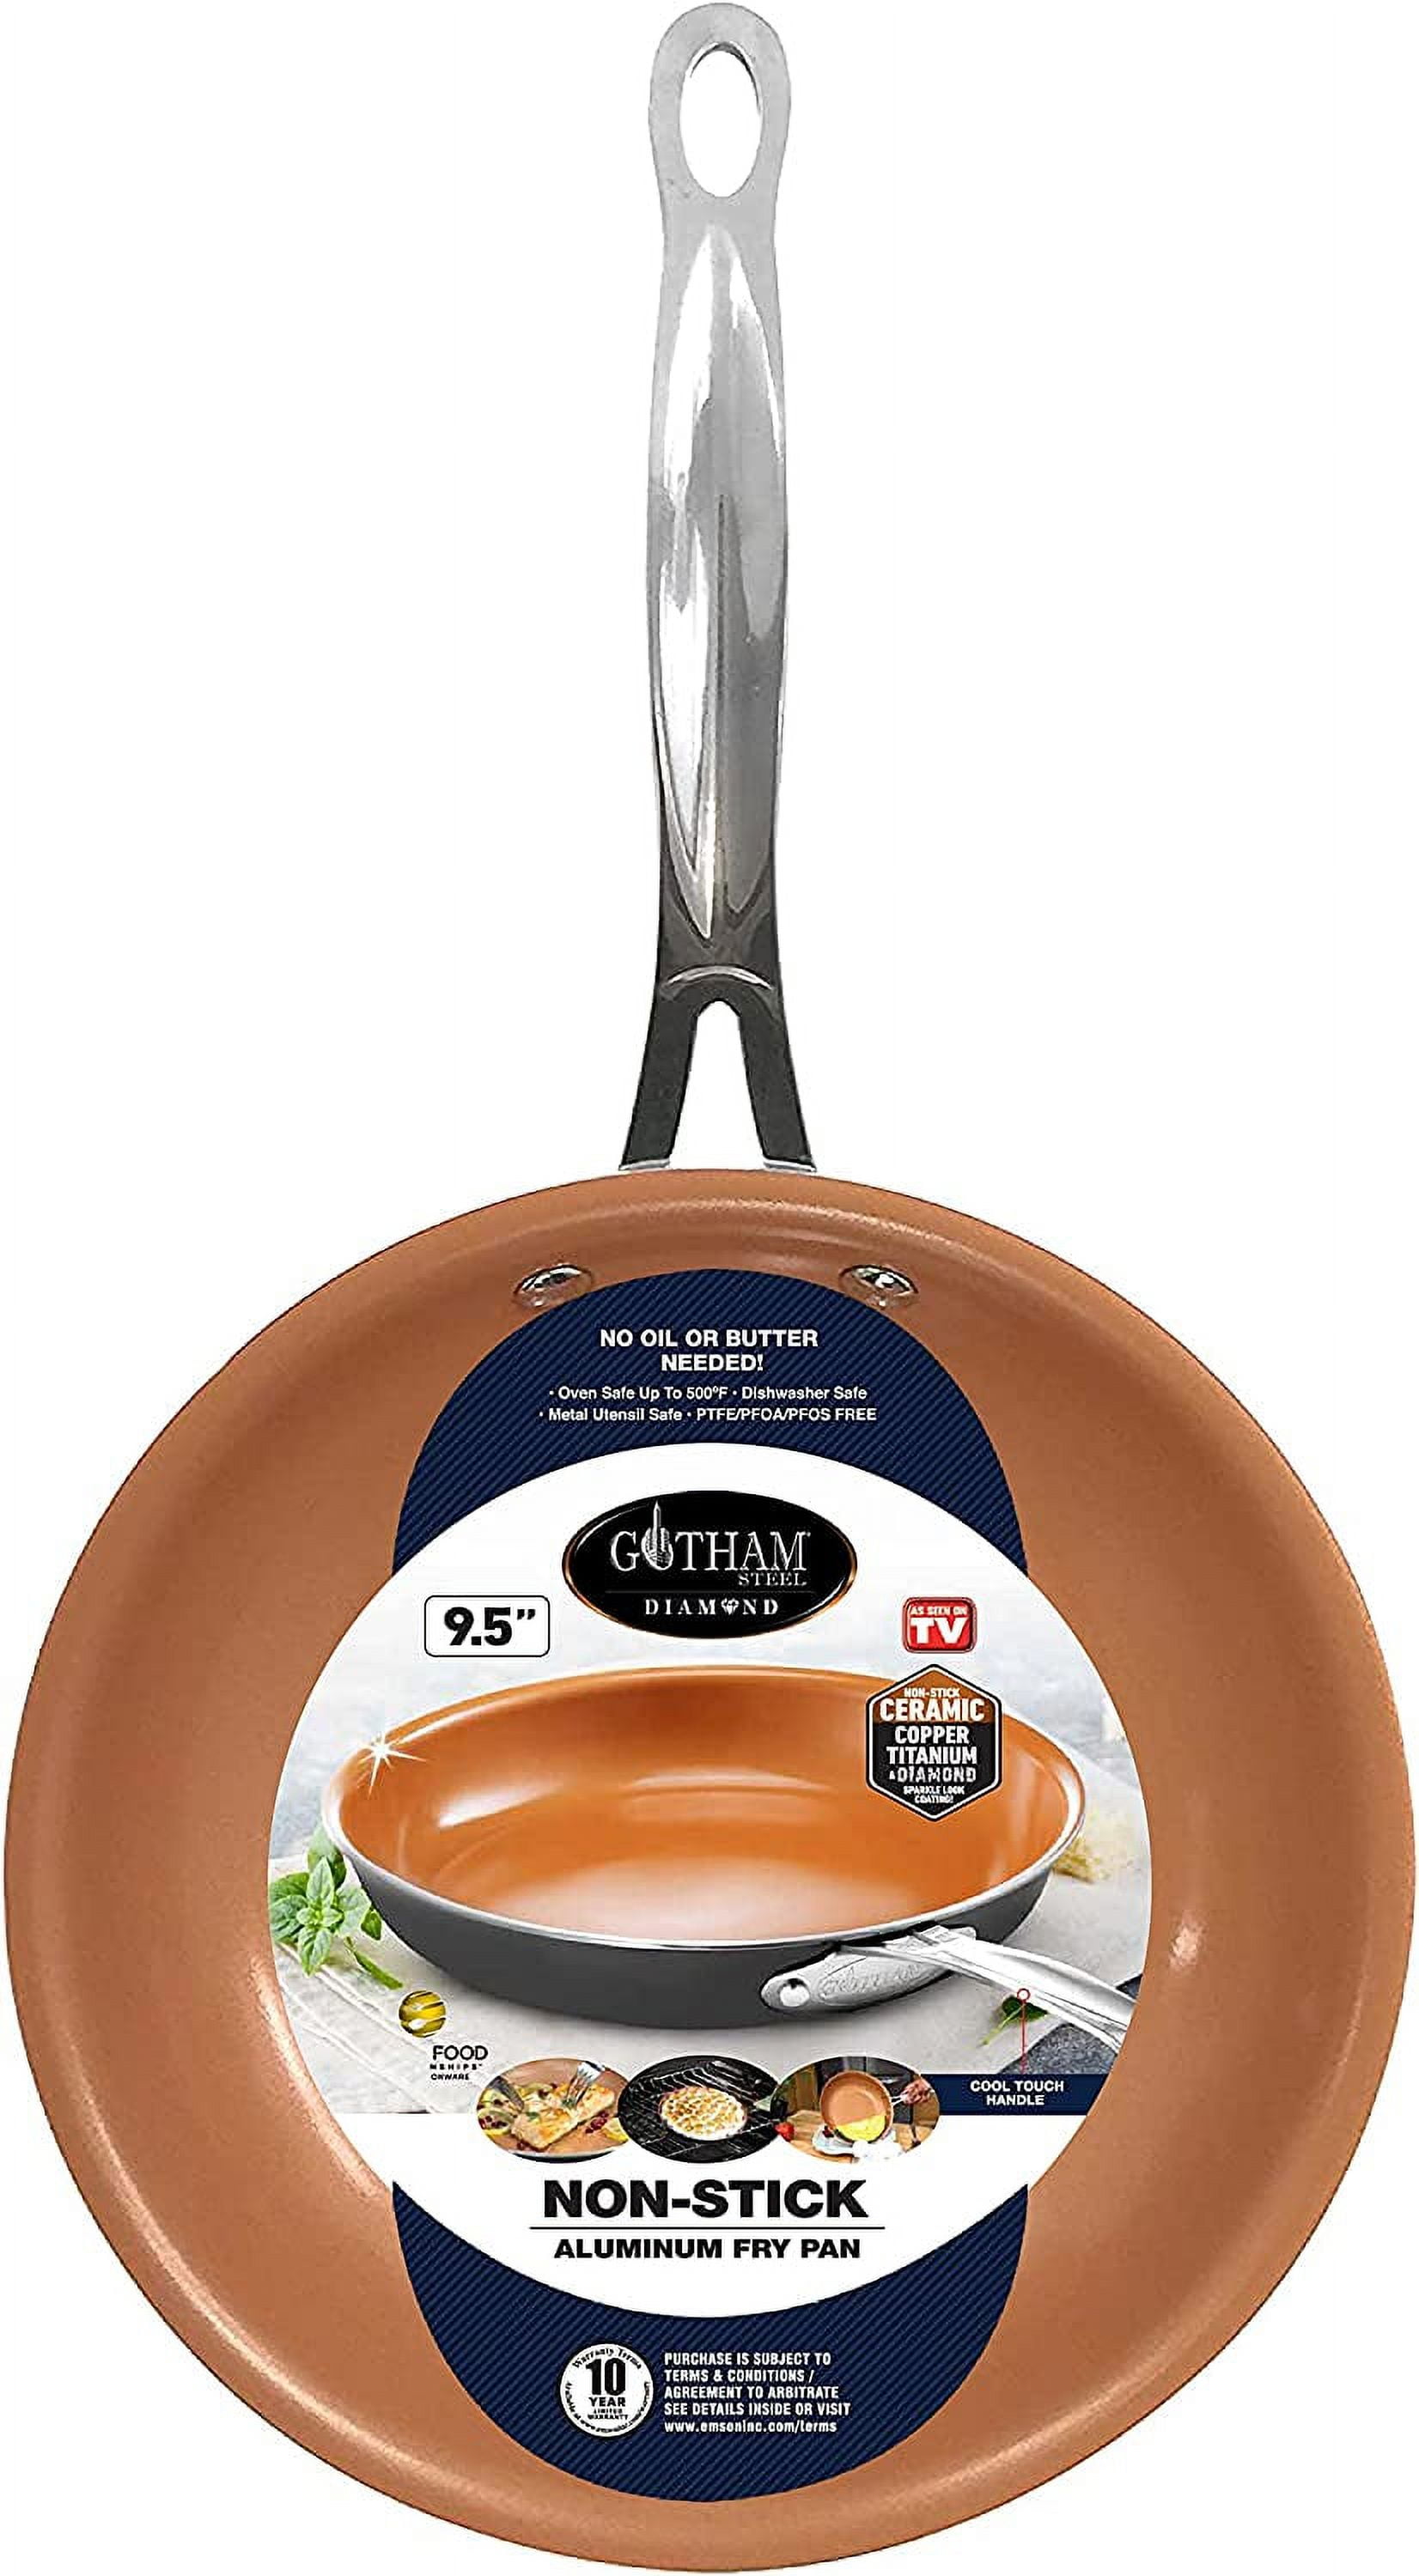  Fashionwu Frying Pans Nonstick 9.5 Inch, Non Stick Skillet Pan  with Stainless Steel Handle, Pancake Pan, Egg Pan, Non Toxic pans for  Cooking, Dishwasher Safe: Home & Kitchen